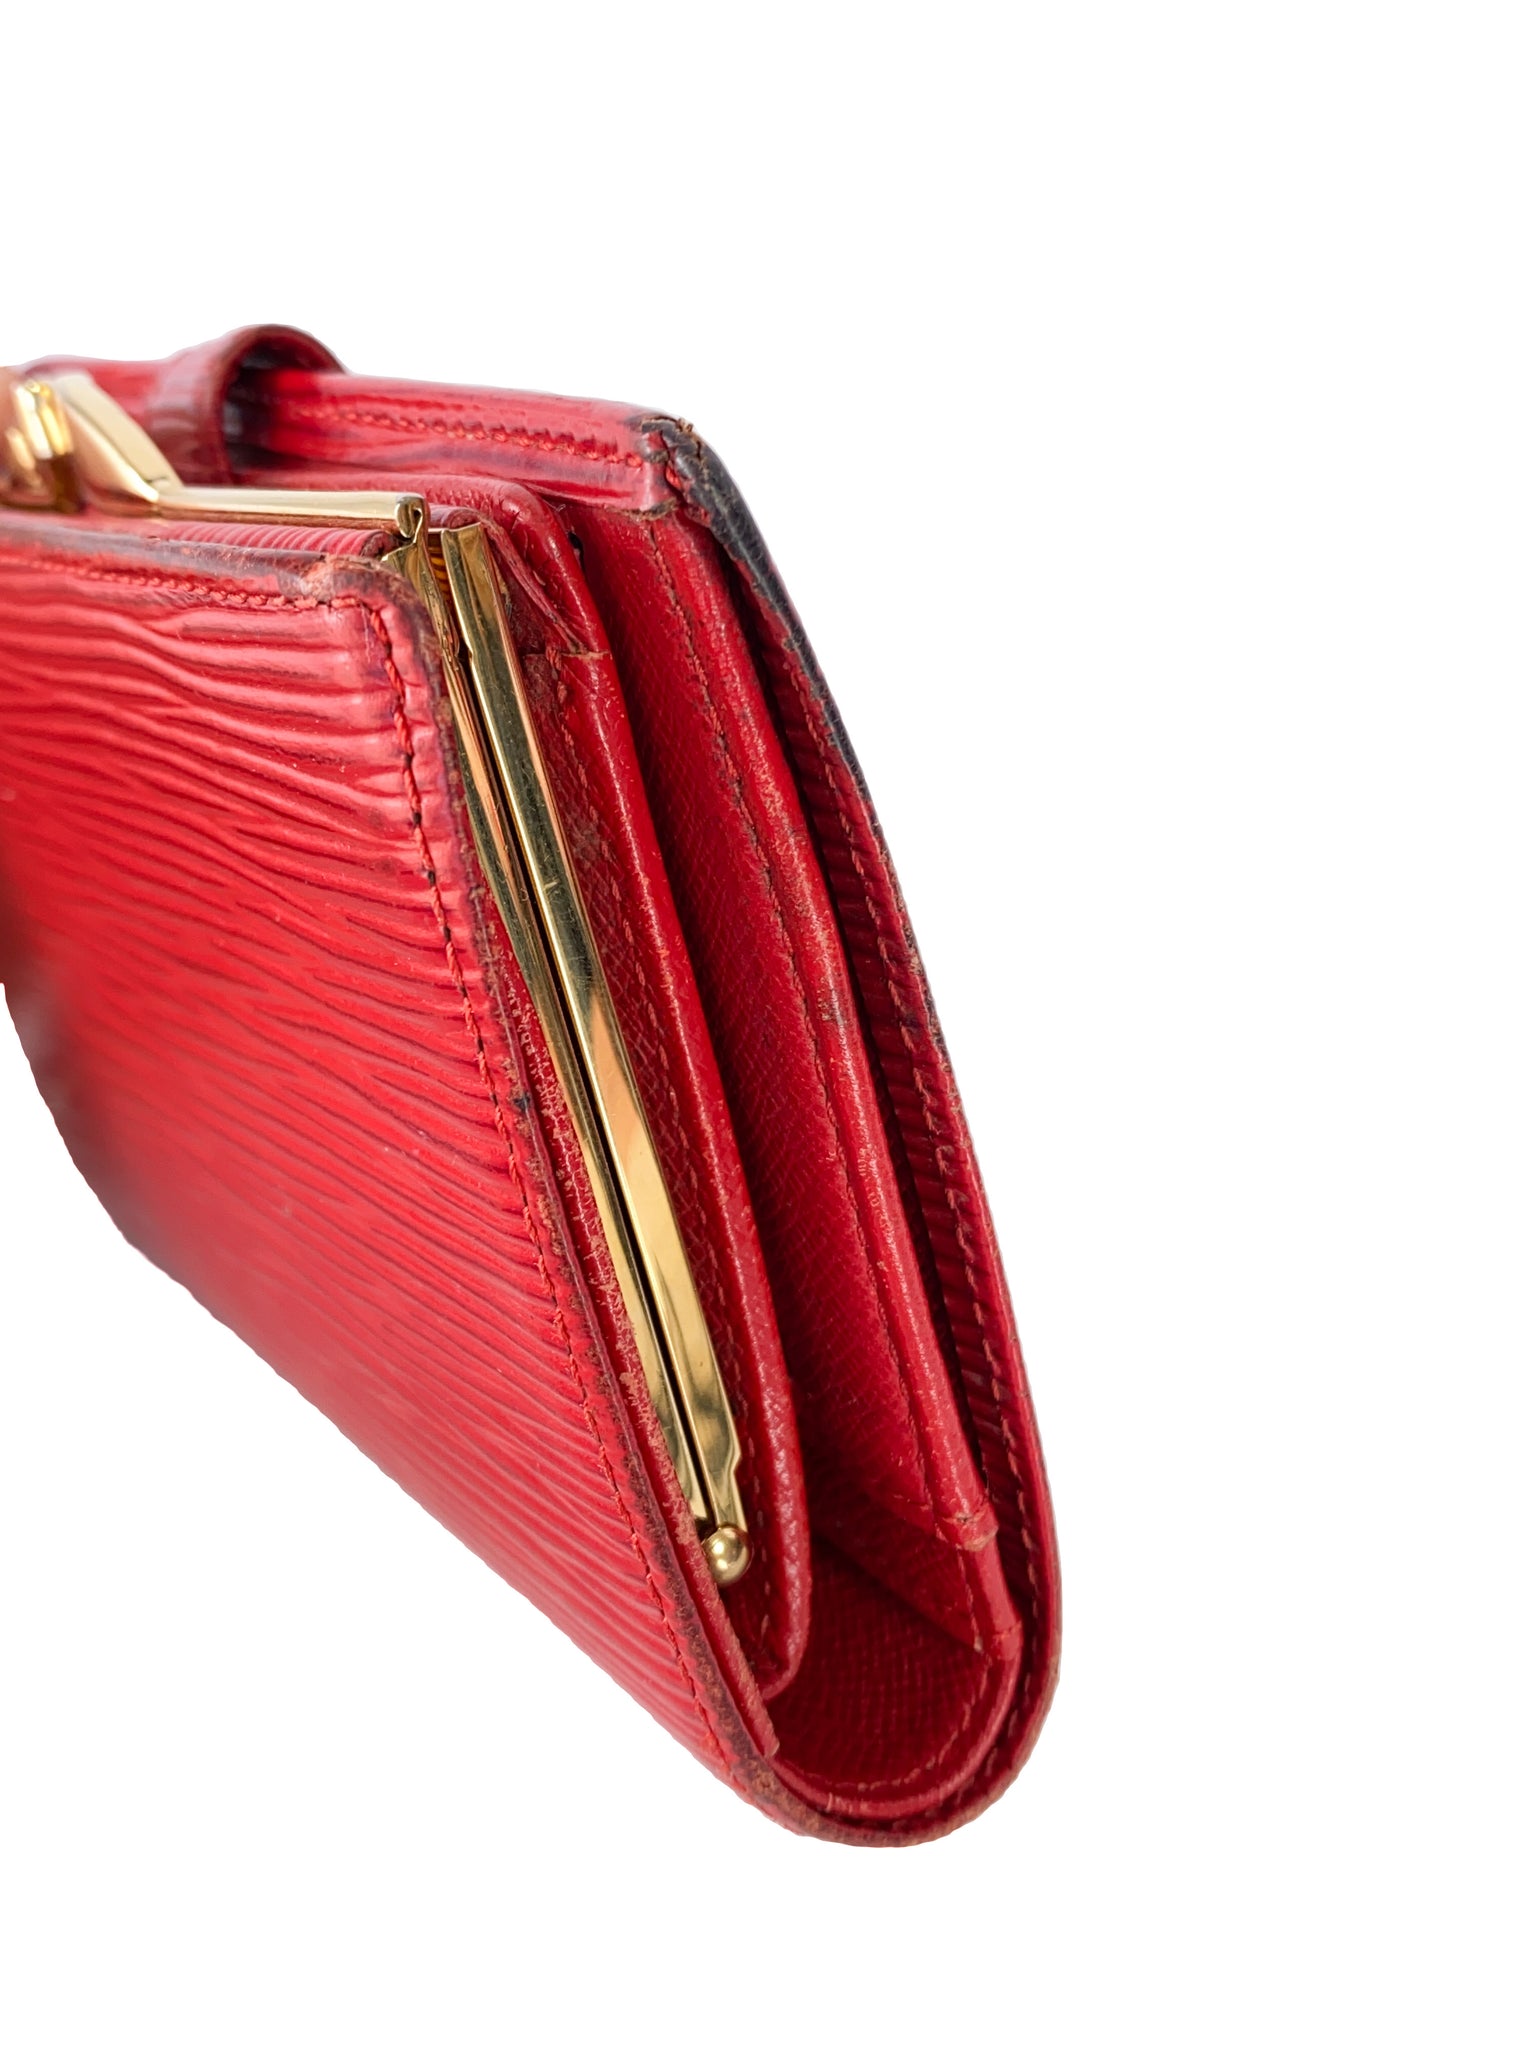 Louis Vuitton Card Holder Wallet - Red EPI Leather